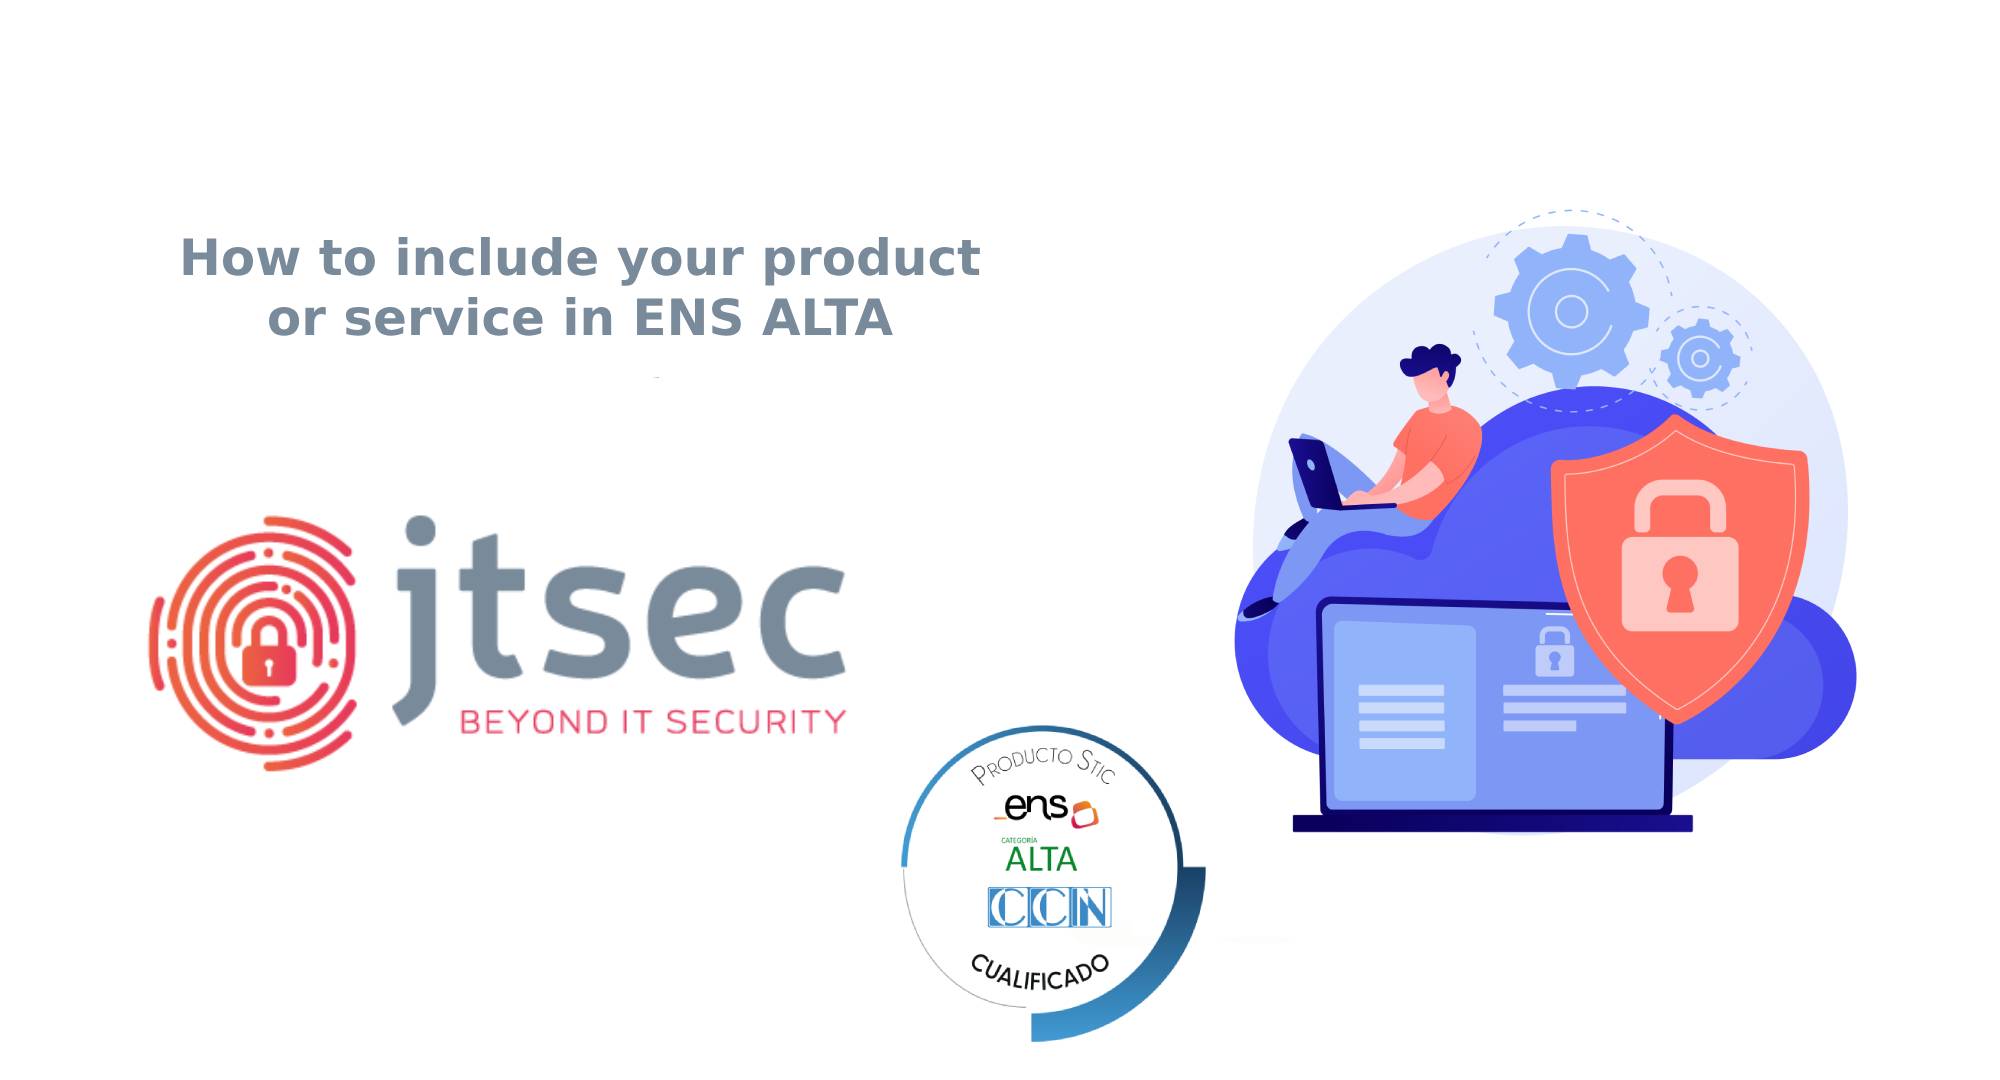  How to include your product or service in ENS ALTA.